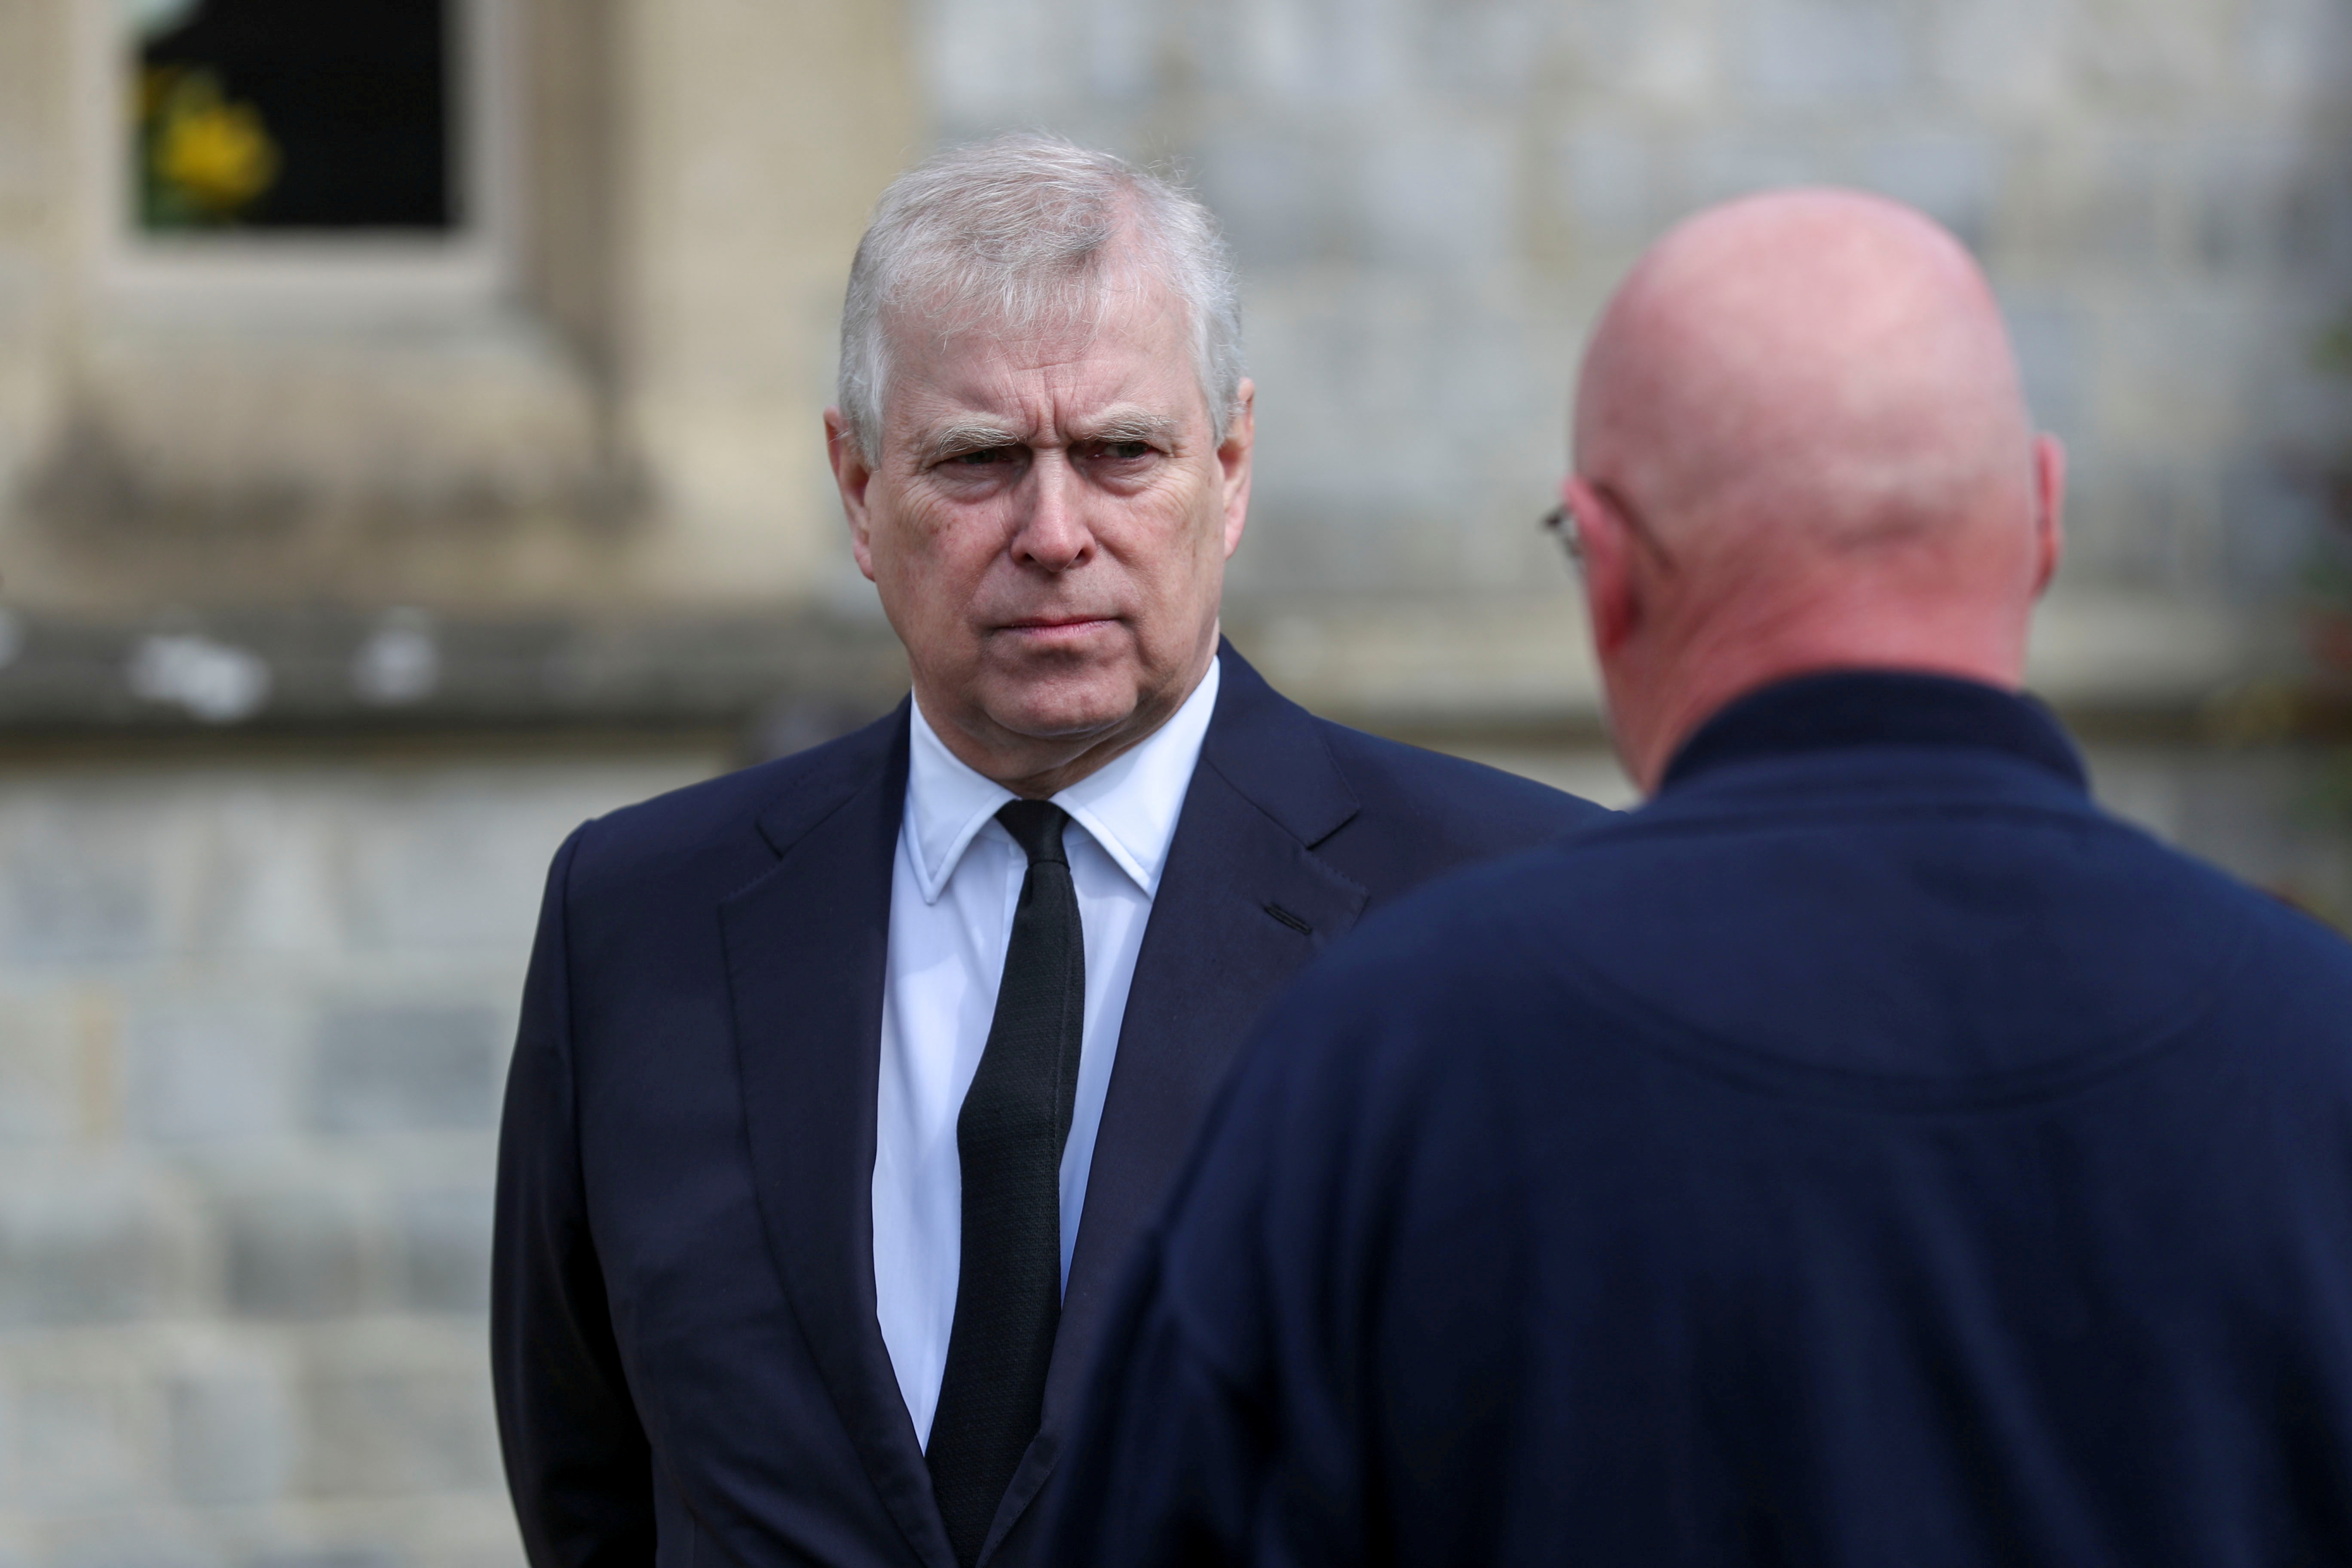 Britain's Prince Andrew attends Sunday service at the Royal Chapel of All Saints at Windsor Great Park, Britain following Friday's death of his father Prince Philip at age 99, April 11, 2021. Steve Parsons/PA Wire/Pool via REUTERS 